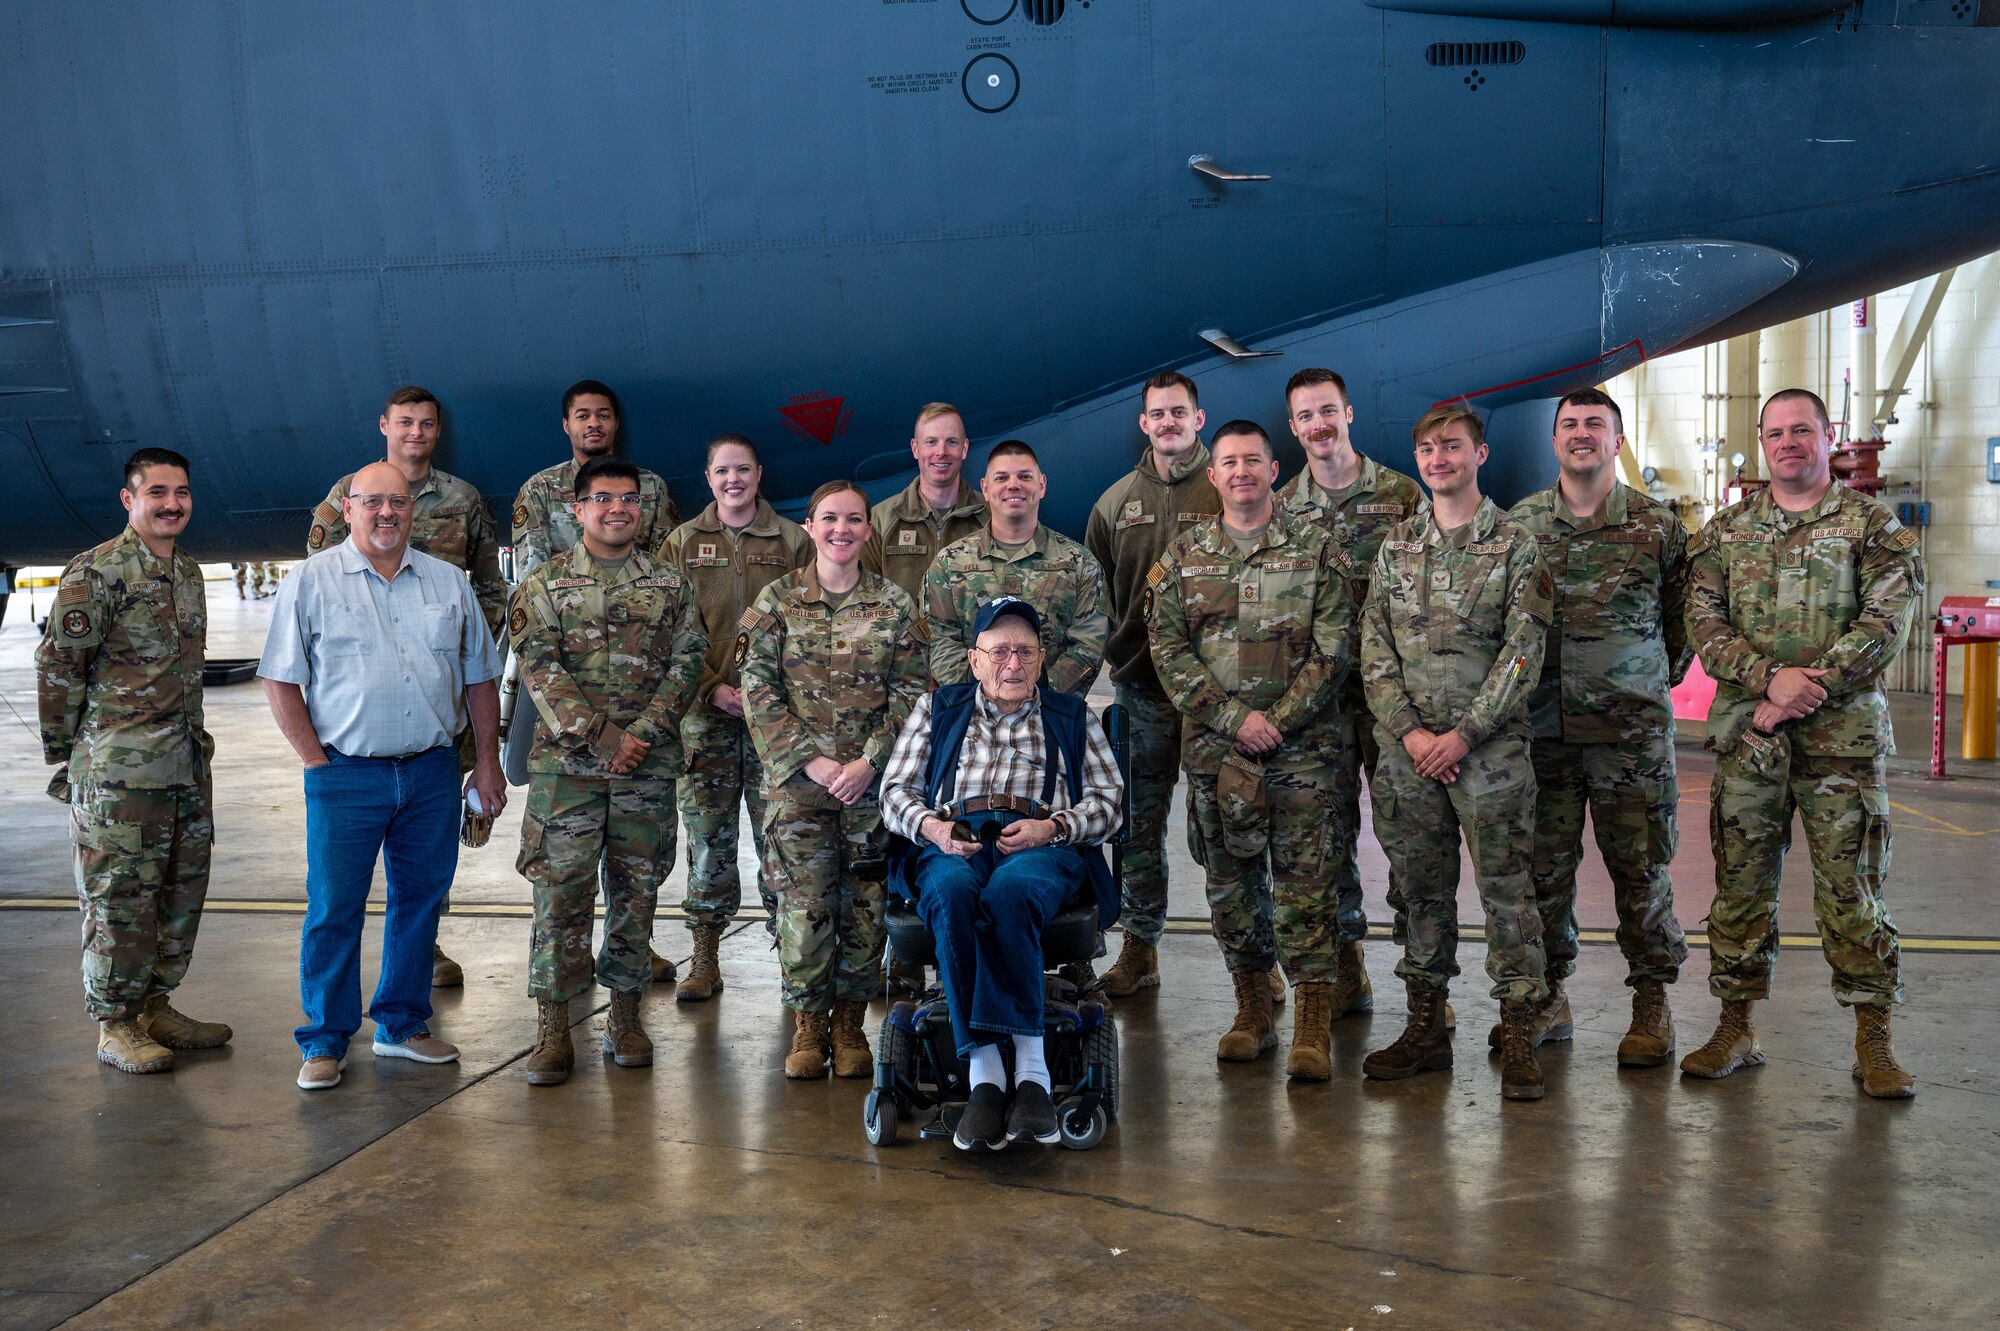 2nd Maintenance Squadron maintainers pose for a photo with retired Senior Master Sgt. John McNeece at Barksdale Air Force Base, La., October 18, 2023. McNeece served in the U.S. Air Force from 1952 to 1975 and worked as a maintainer when the B-52 was first introduced. (U.S. Air Force photo by Airman 1st Class Seth Watson)